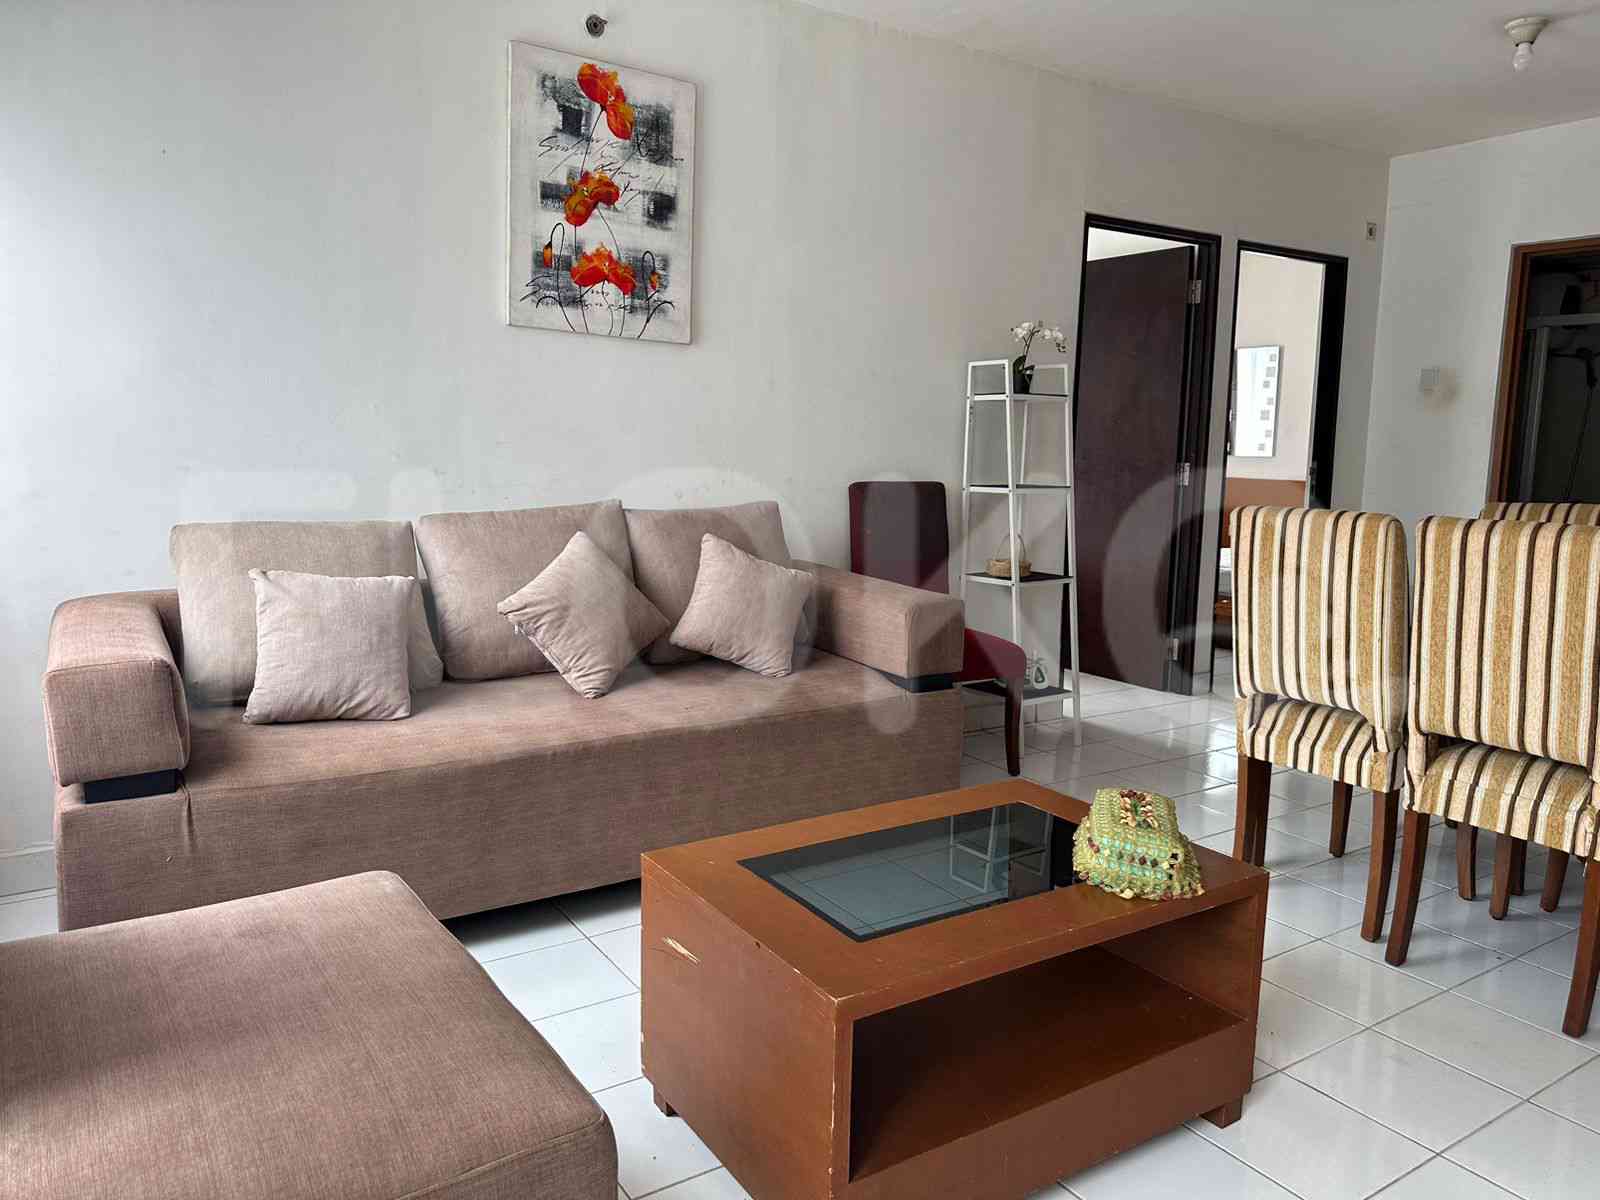 64 sqm, 19th floor, 2 BR apartment for sale in Kuningan 1